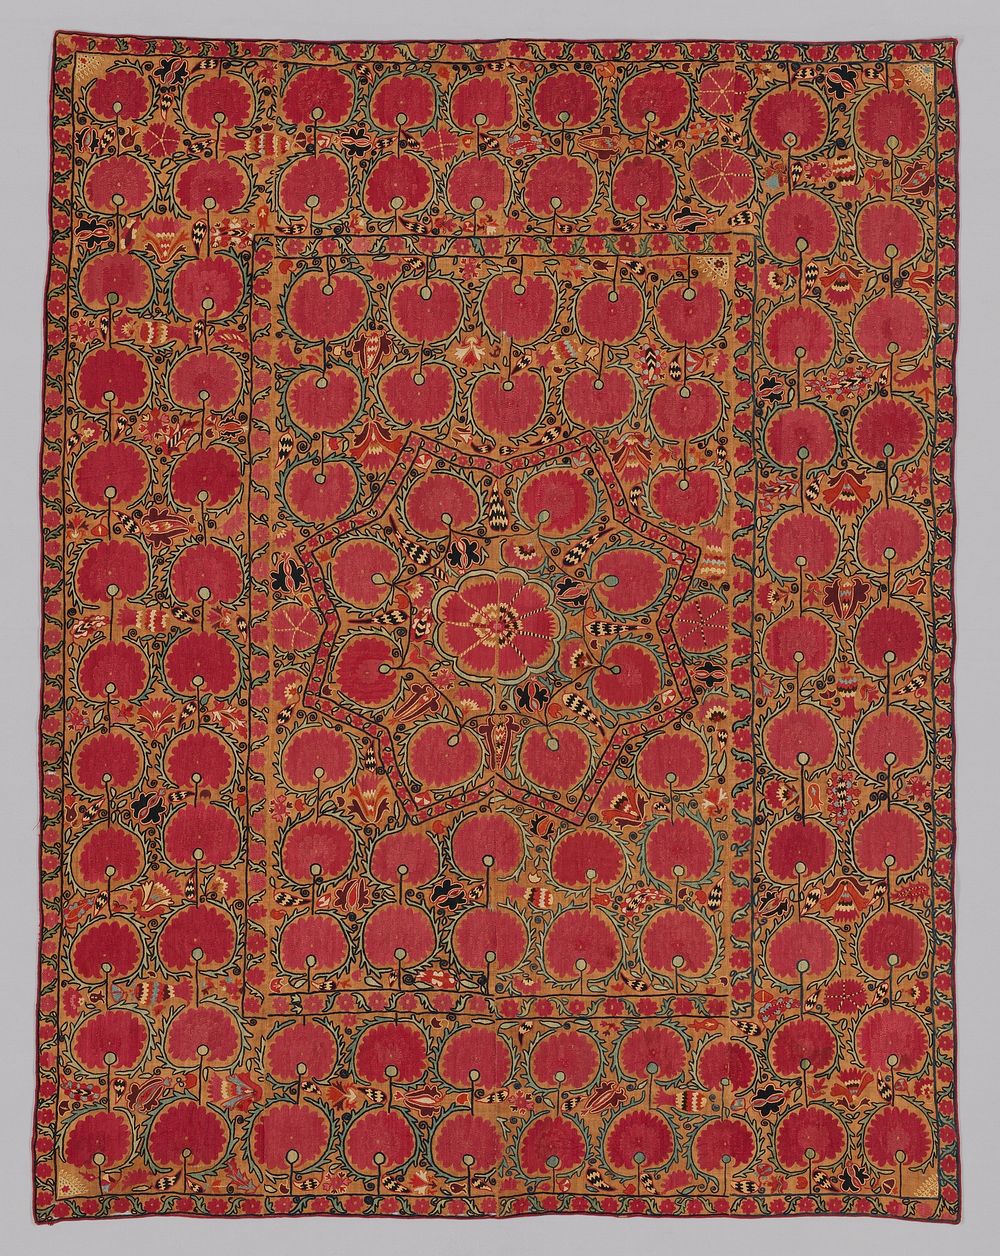 Suzani (large hanging or cover)